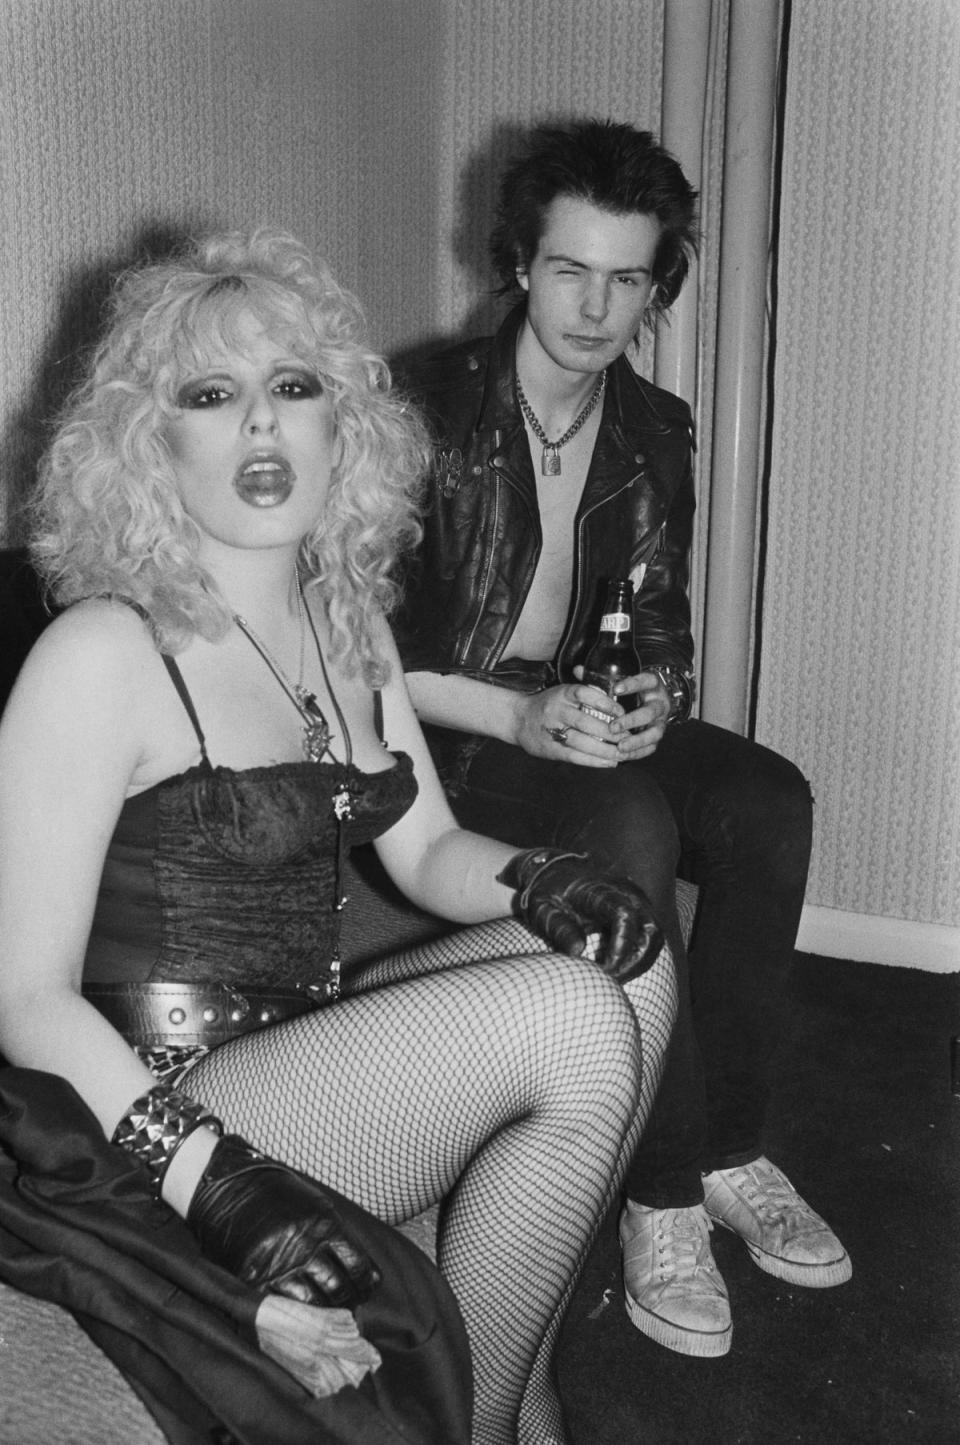 Sid Vicious later retracted his ‘confession’ admitting to murdering his girlfriend Nancy Spungen (Getty)